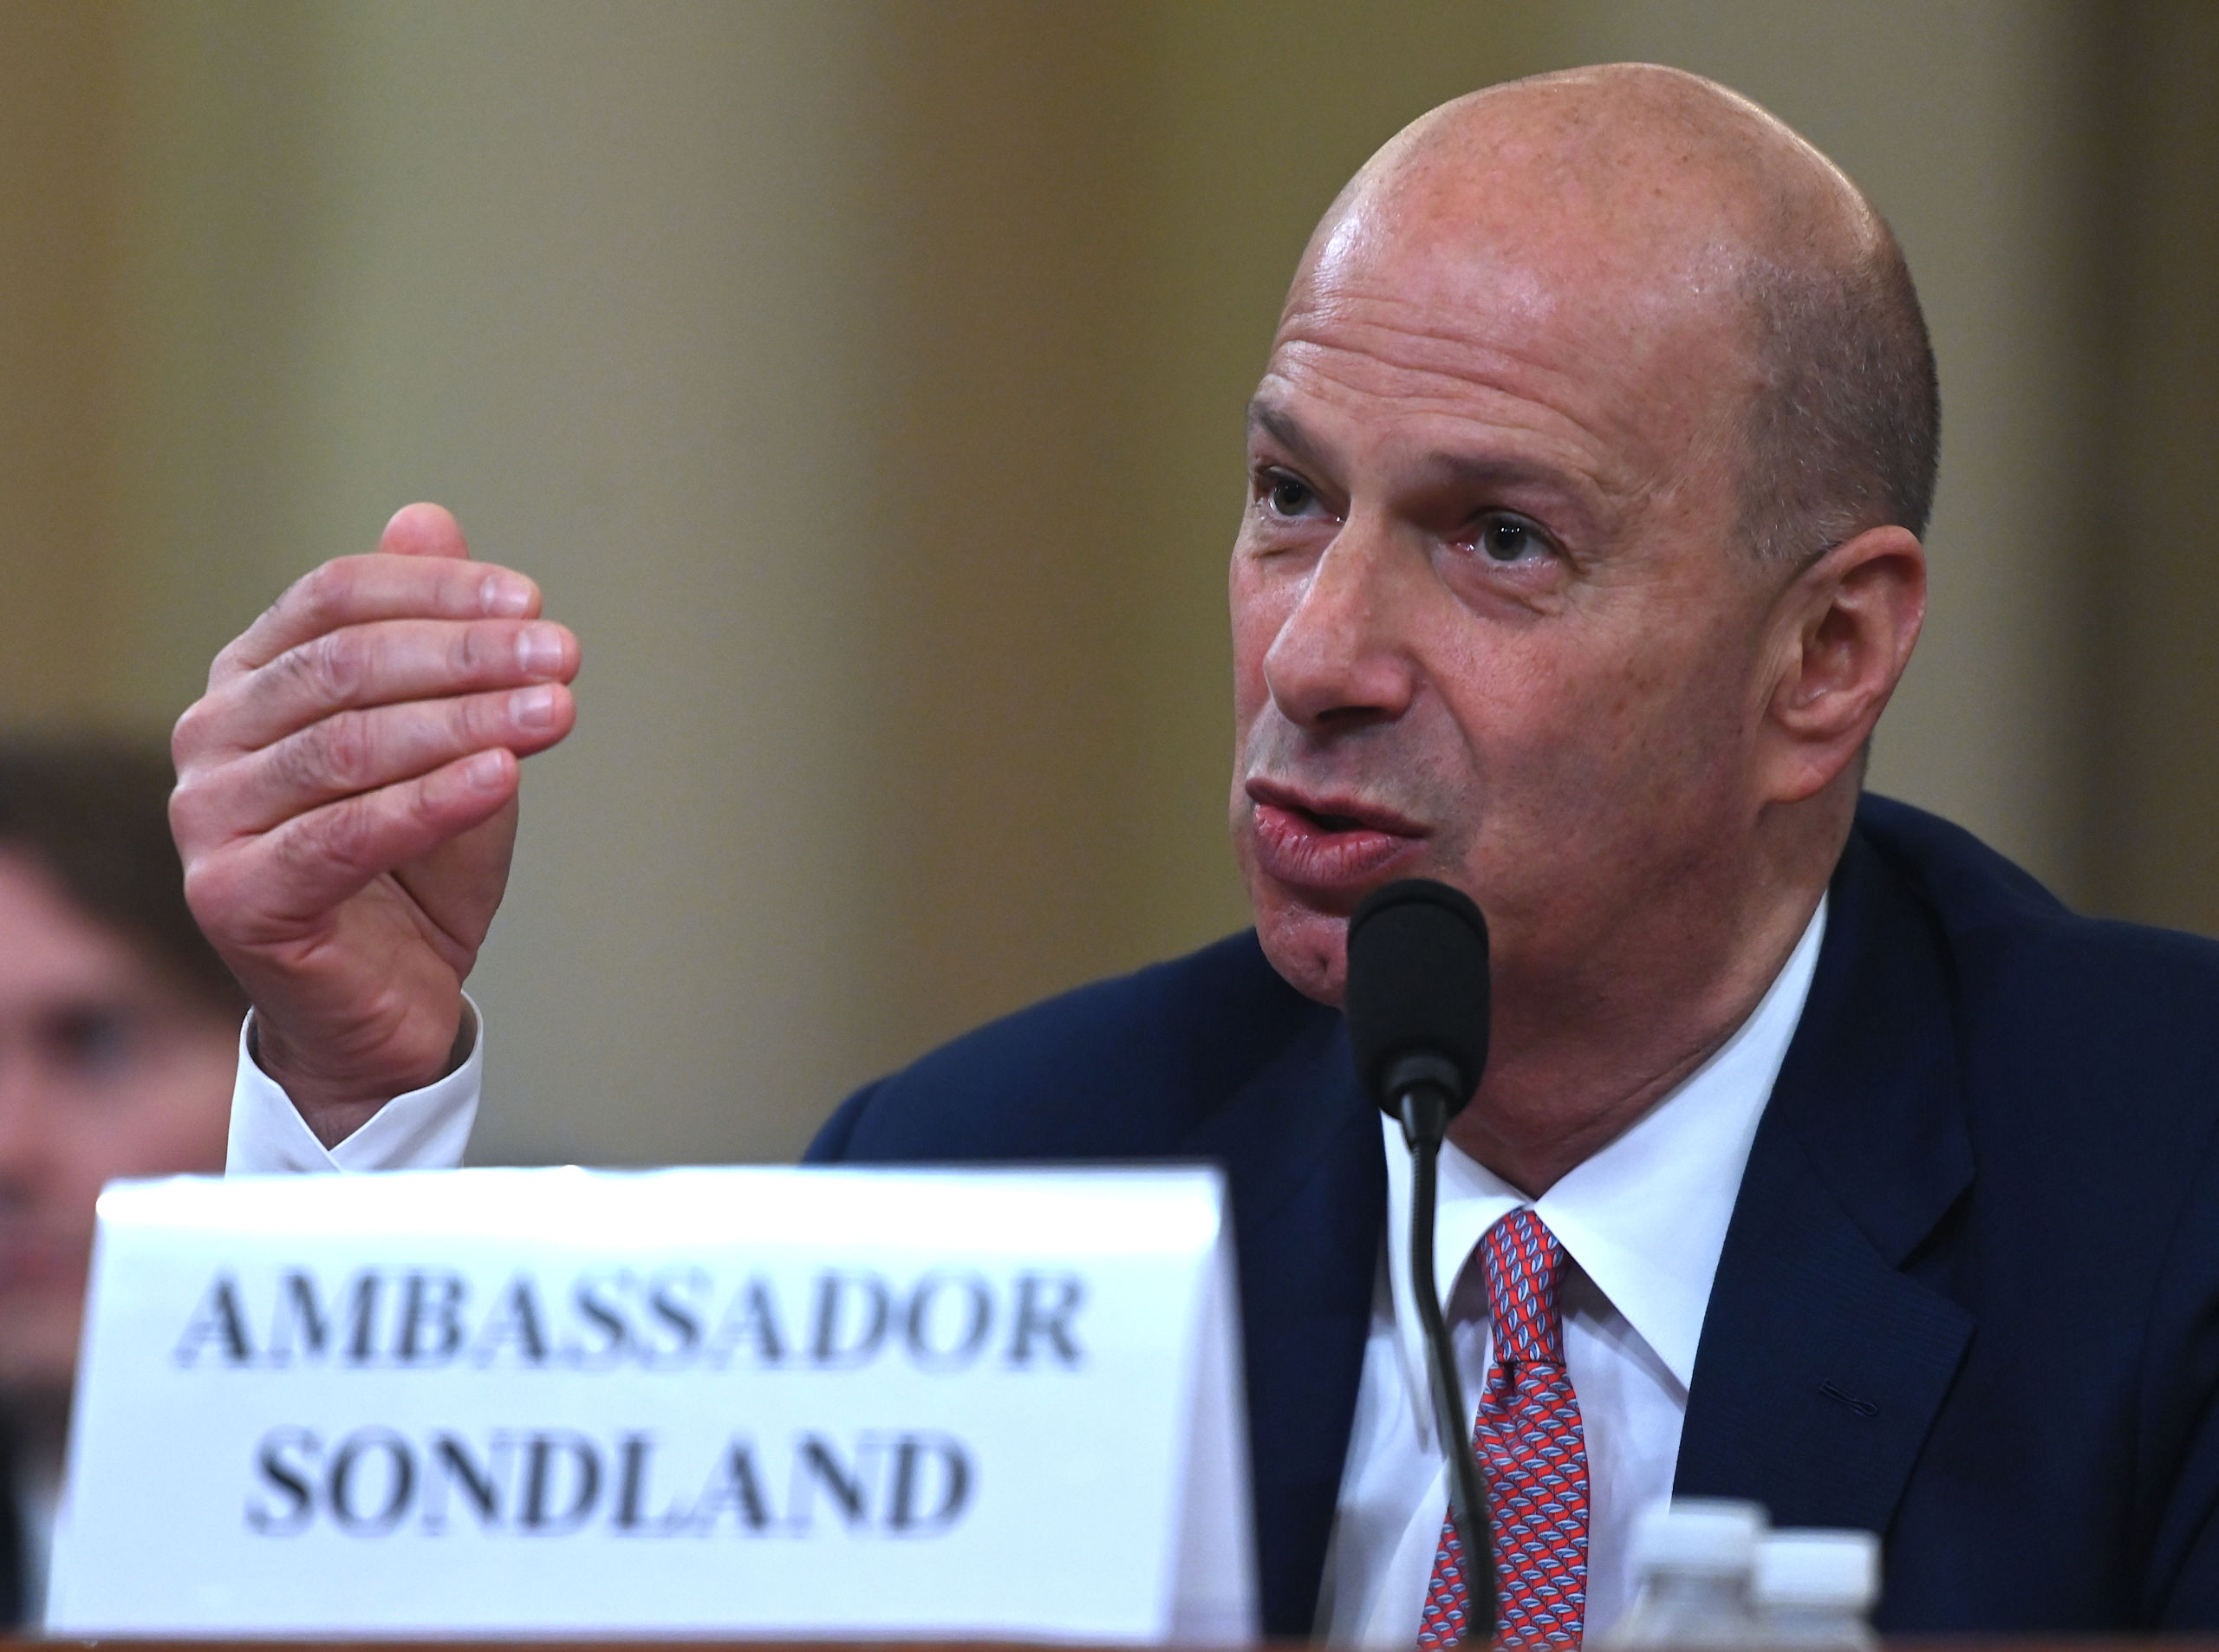 2019-11-20 18:25:31 US Ambassador to the European Union Gordon Sondland testifies during the House Intelligence Committee hearing as part of the impeachment inquiry into US President Donald Trump on Capitol Hill in Washington,DC on November 20, 2019.  The US ambassador to the European Union told an impeachment hearing Wednesday that he was following the orders of President Donald Trump in seeking a "quid pro quo" from Ukraine. Gordon Sondland -- whose appearance before Congress is being watched especially closely as he was a Trump ally -- said he believed the president was pressing Ukraine to investigate his potential 2020 rival Joe Biden. Andrew CABALLERO-REYNOLDS / AFP